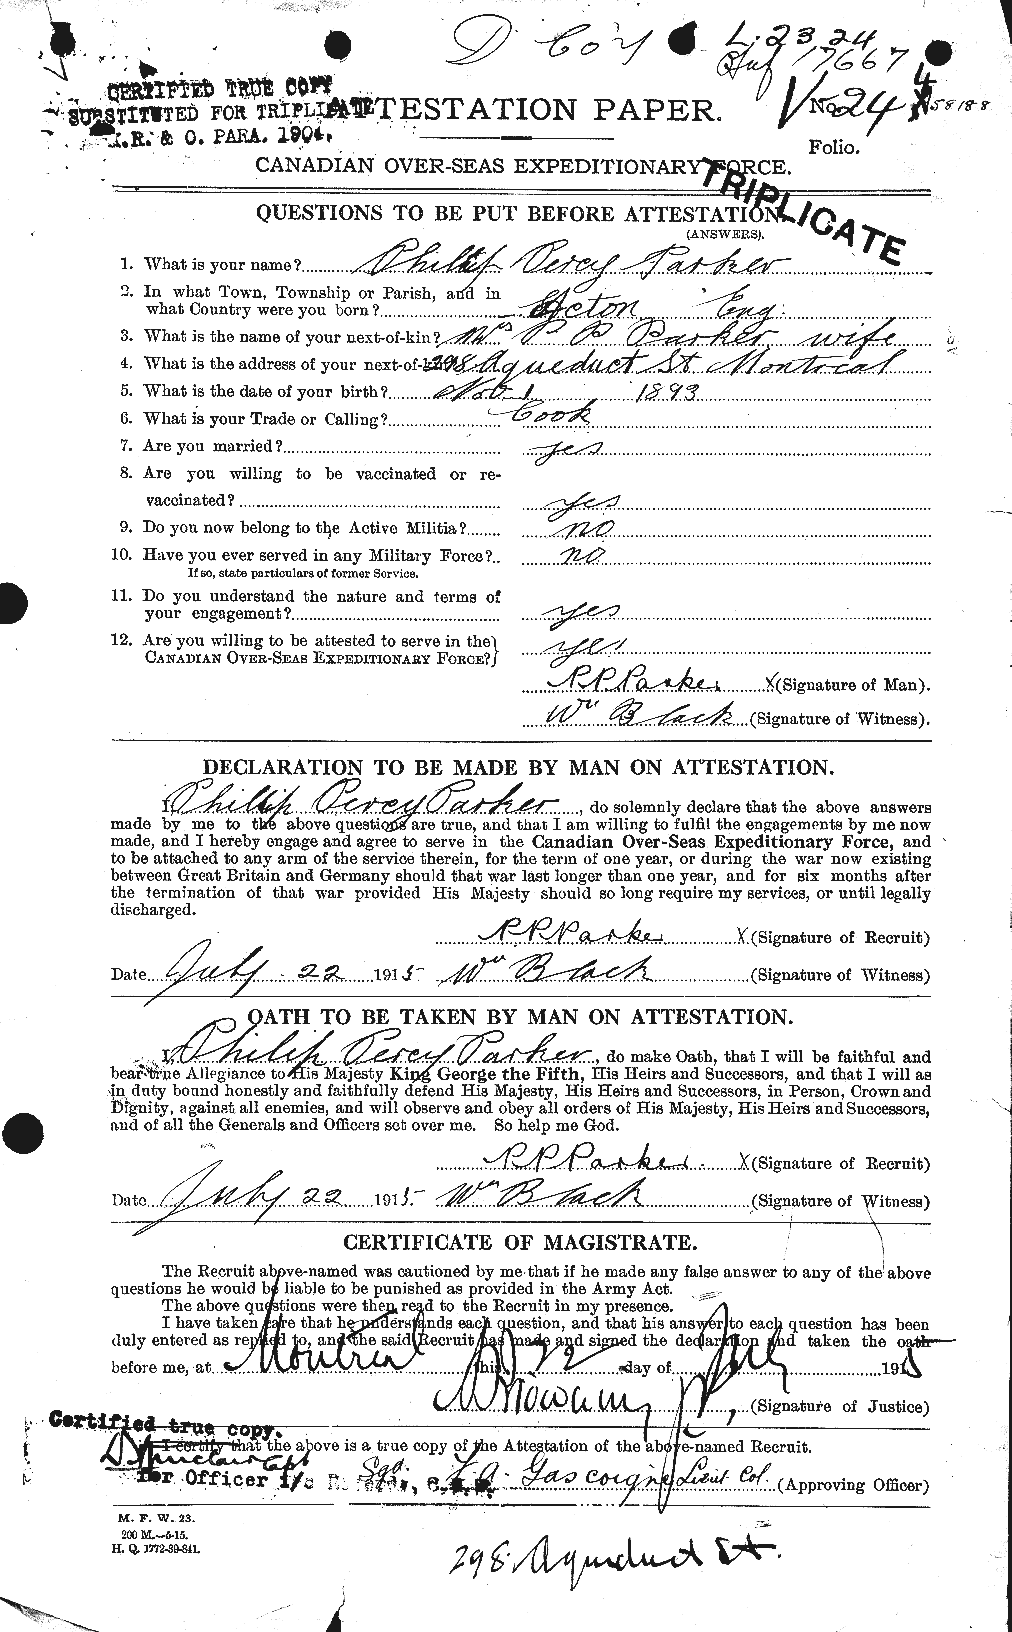 Personnel Records of the First World War - CEF 565566a